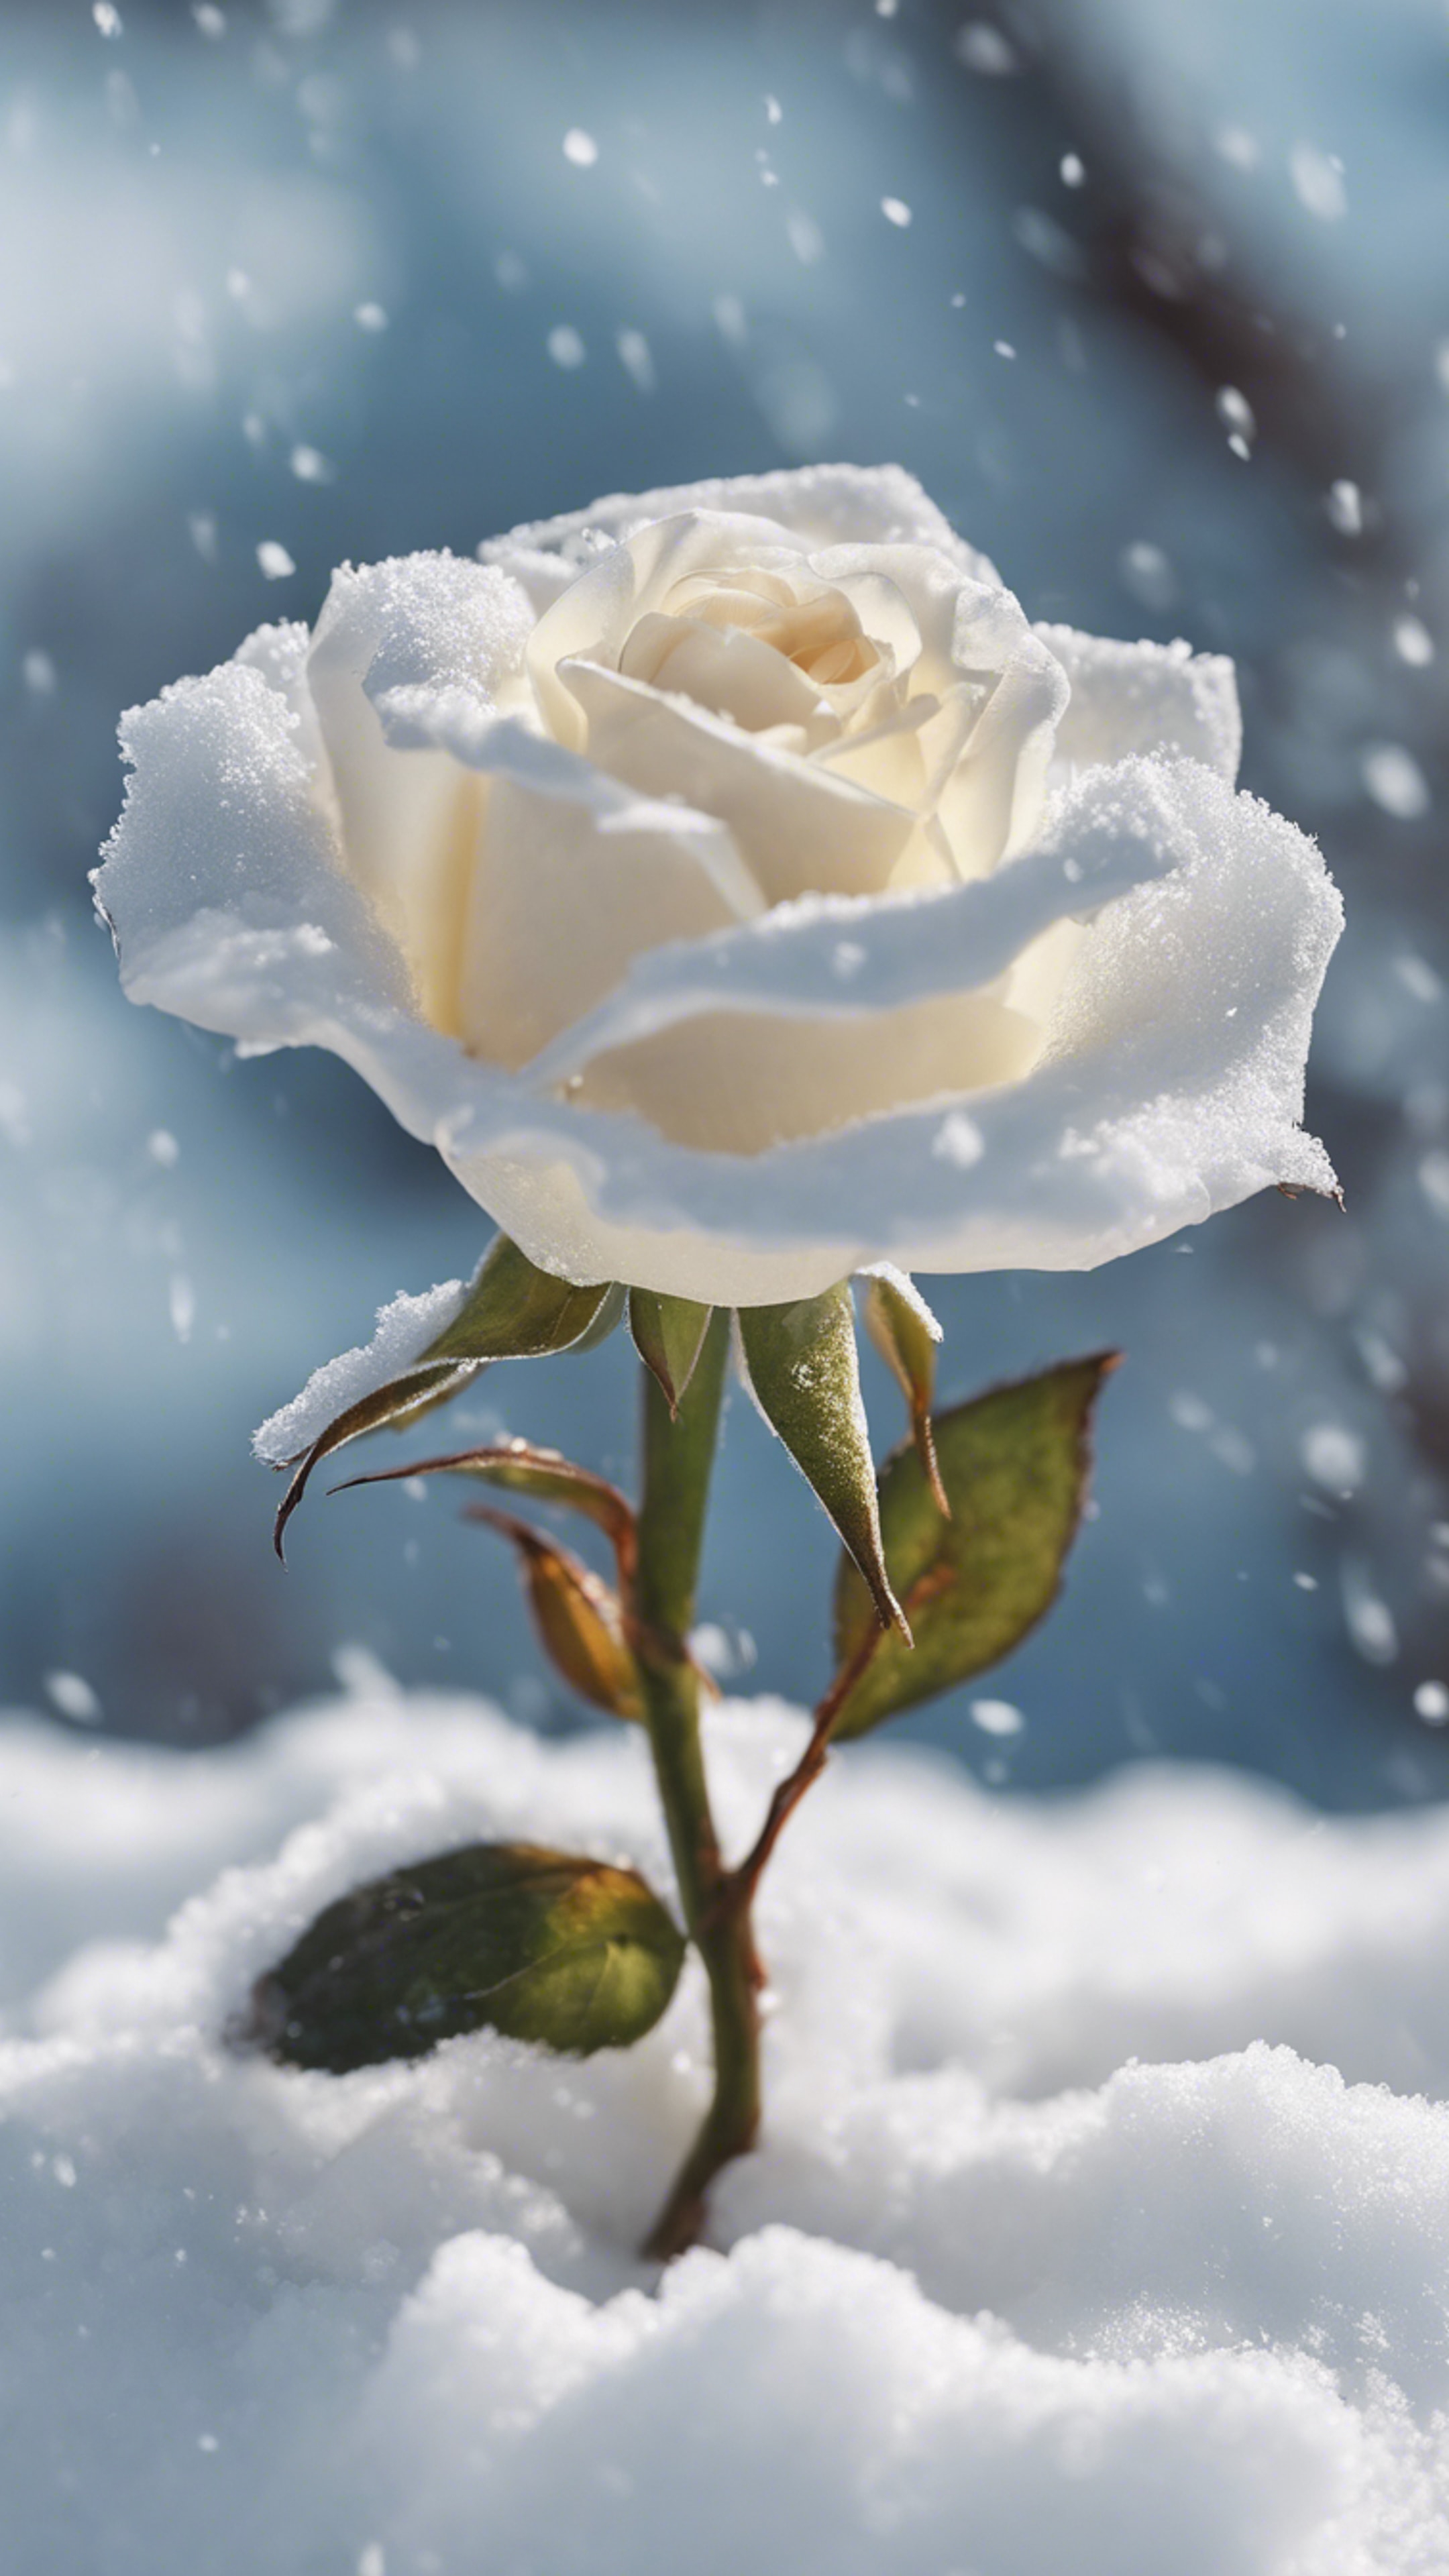 A newly opened white rose sticking out of a snowdrift in early spring. Tapet[6918b7c4f5774047824c]